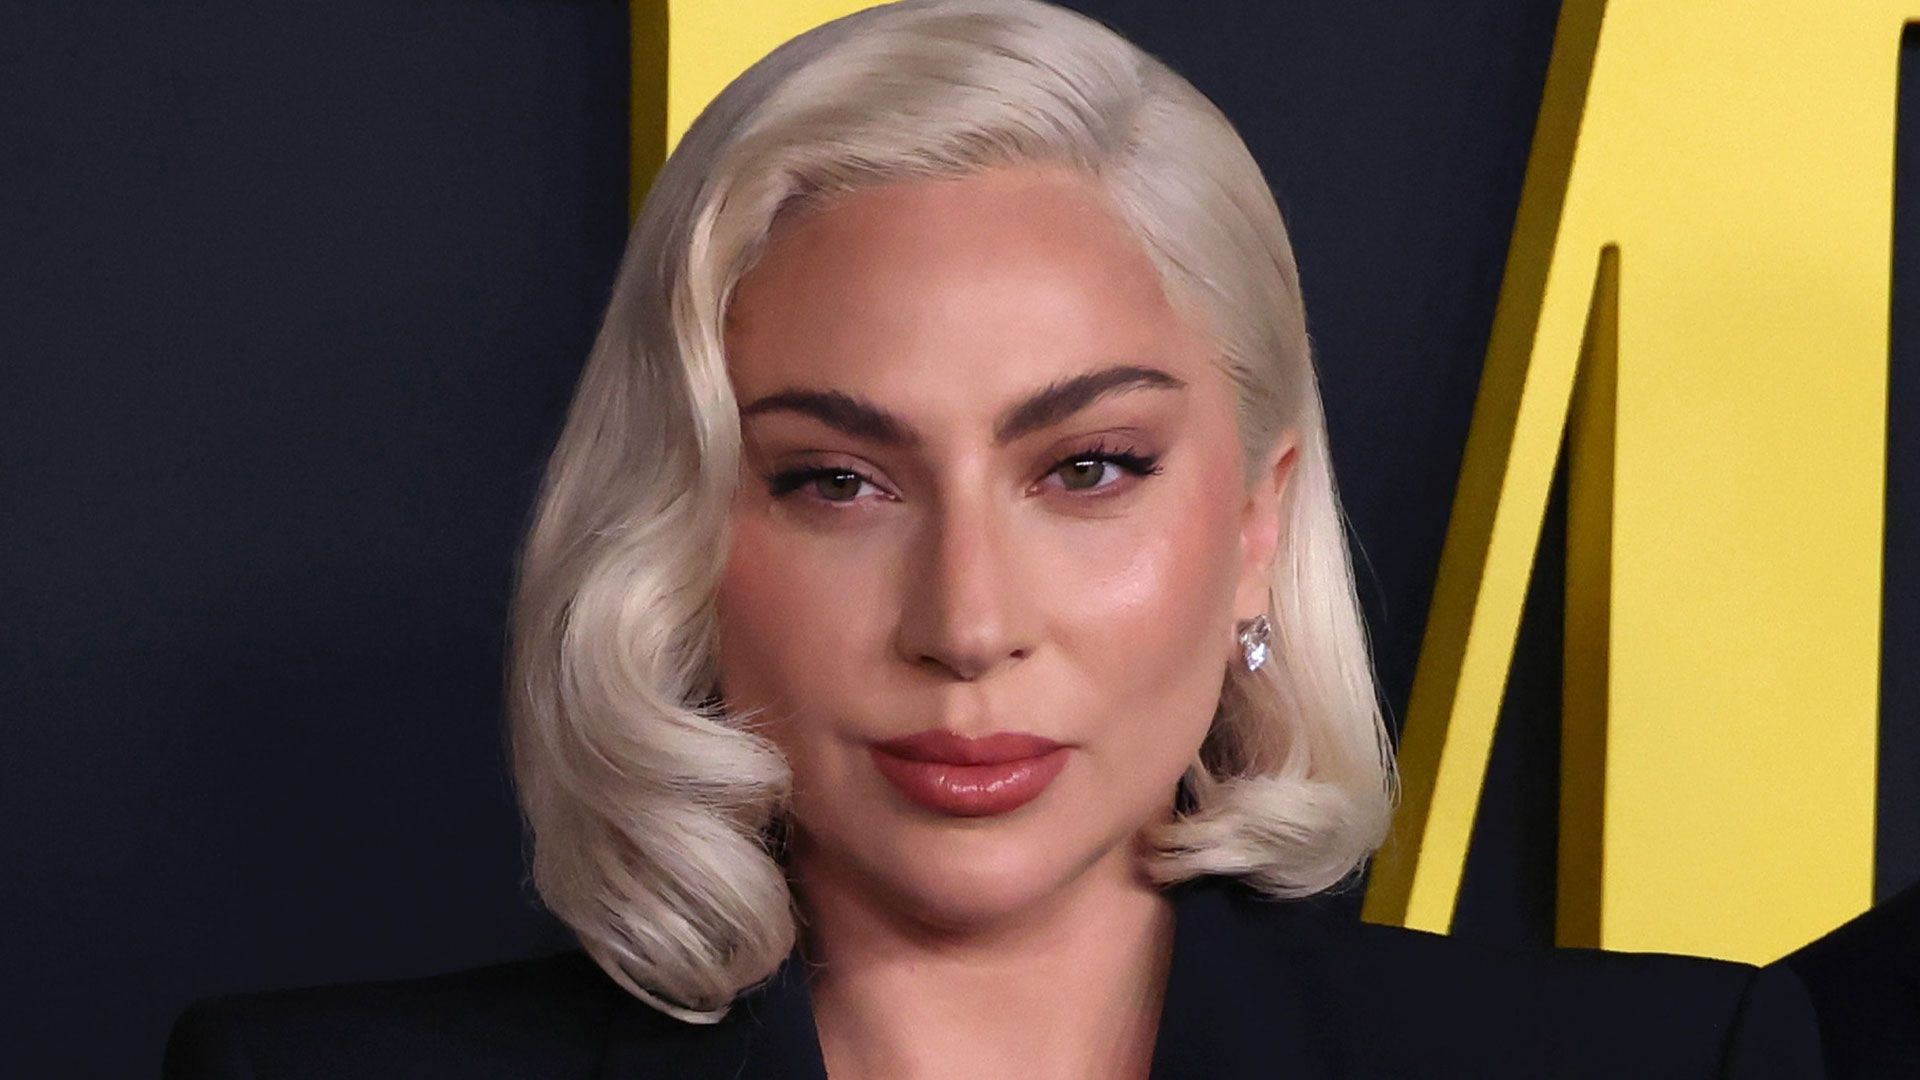 Lady Gaga’s Shocking Transformation Causes Concern Among Fans – Is Her Face Swollen?